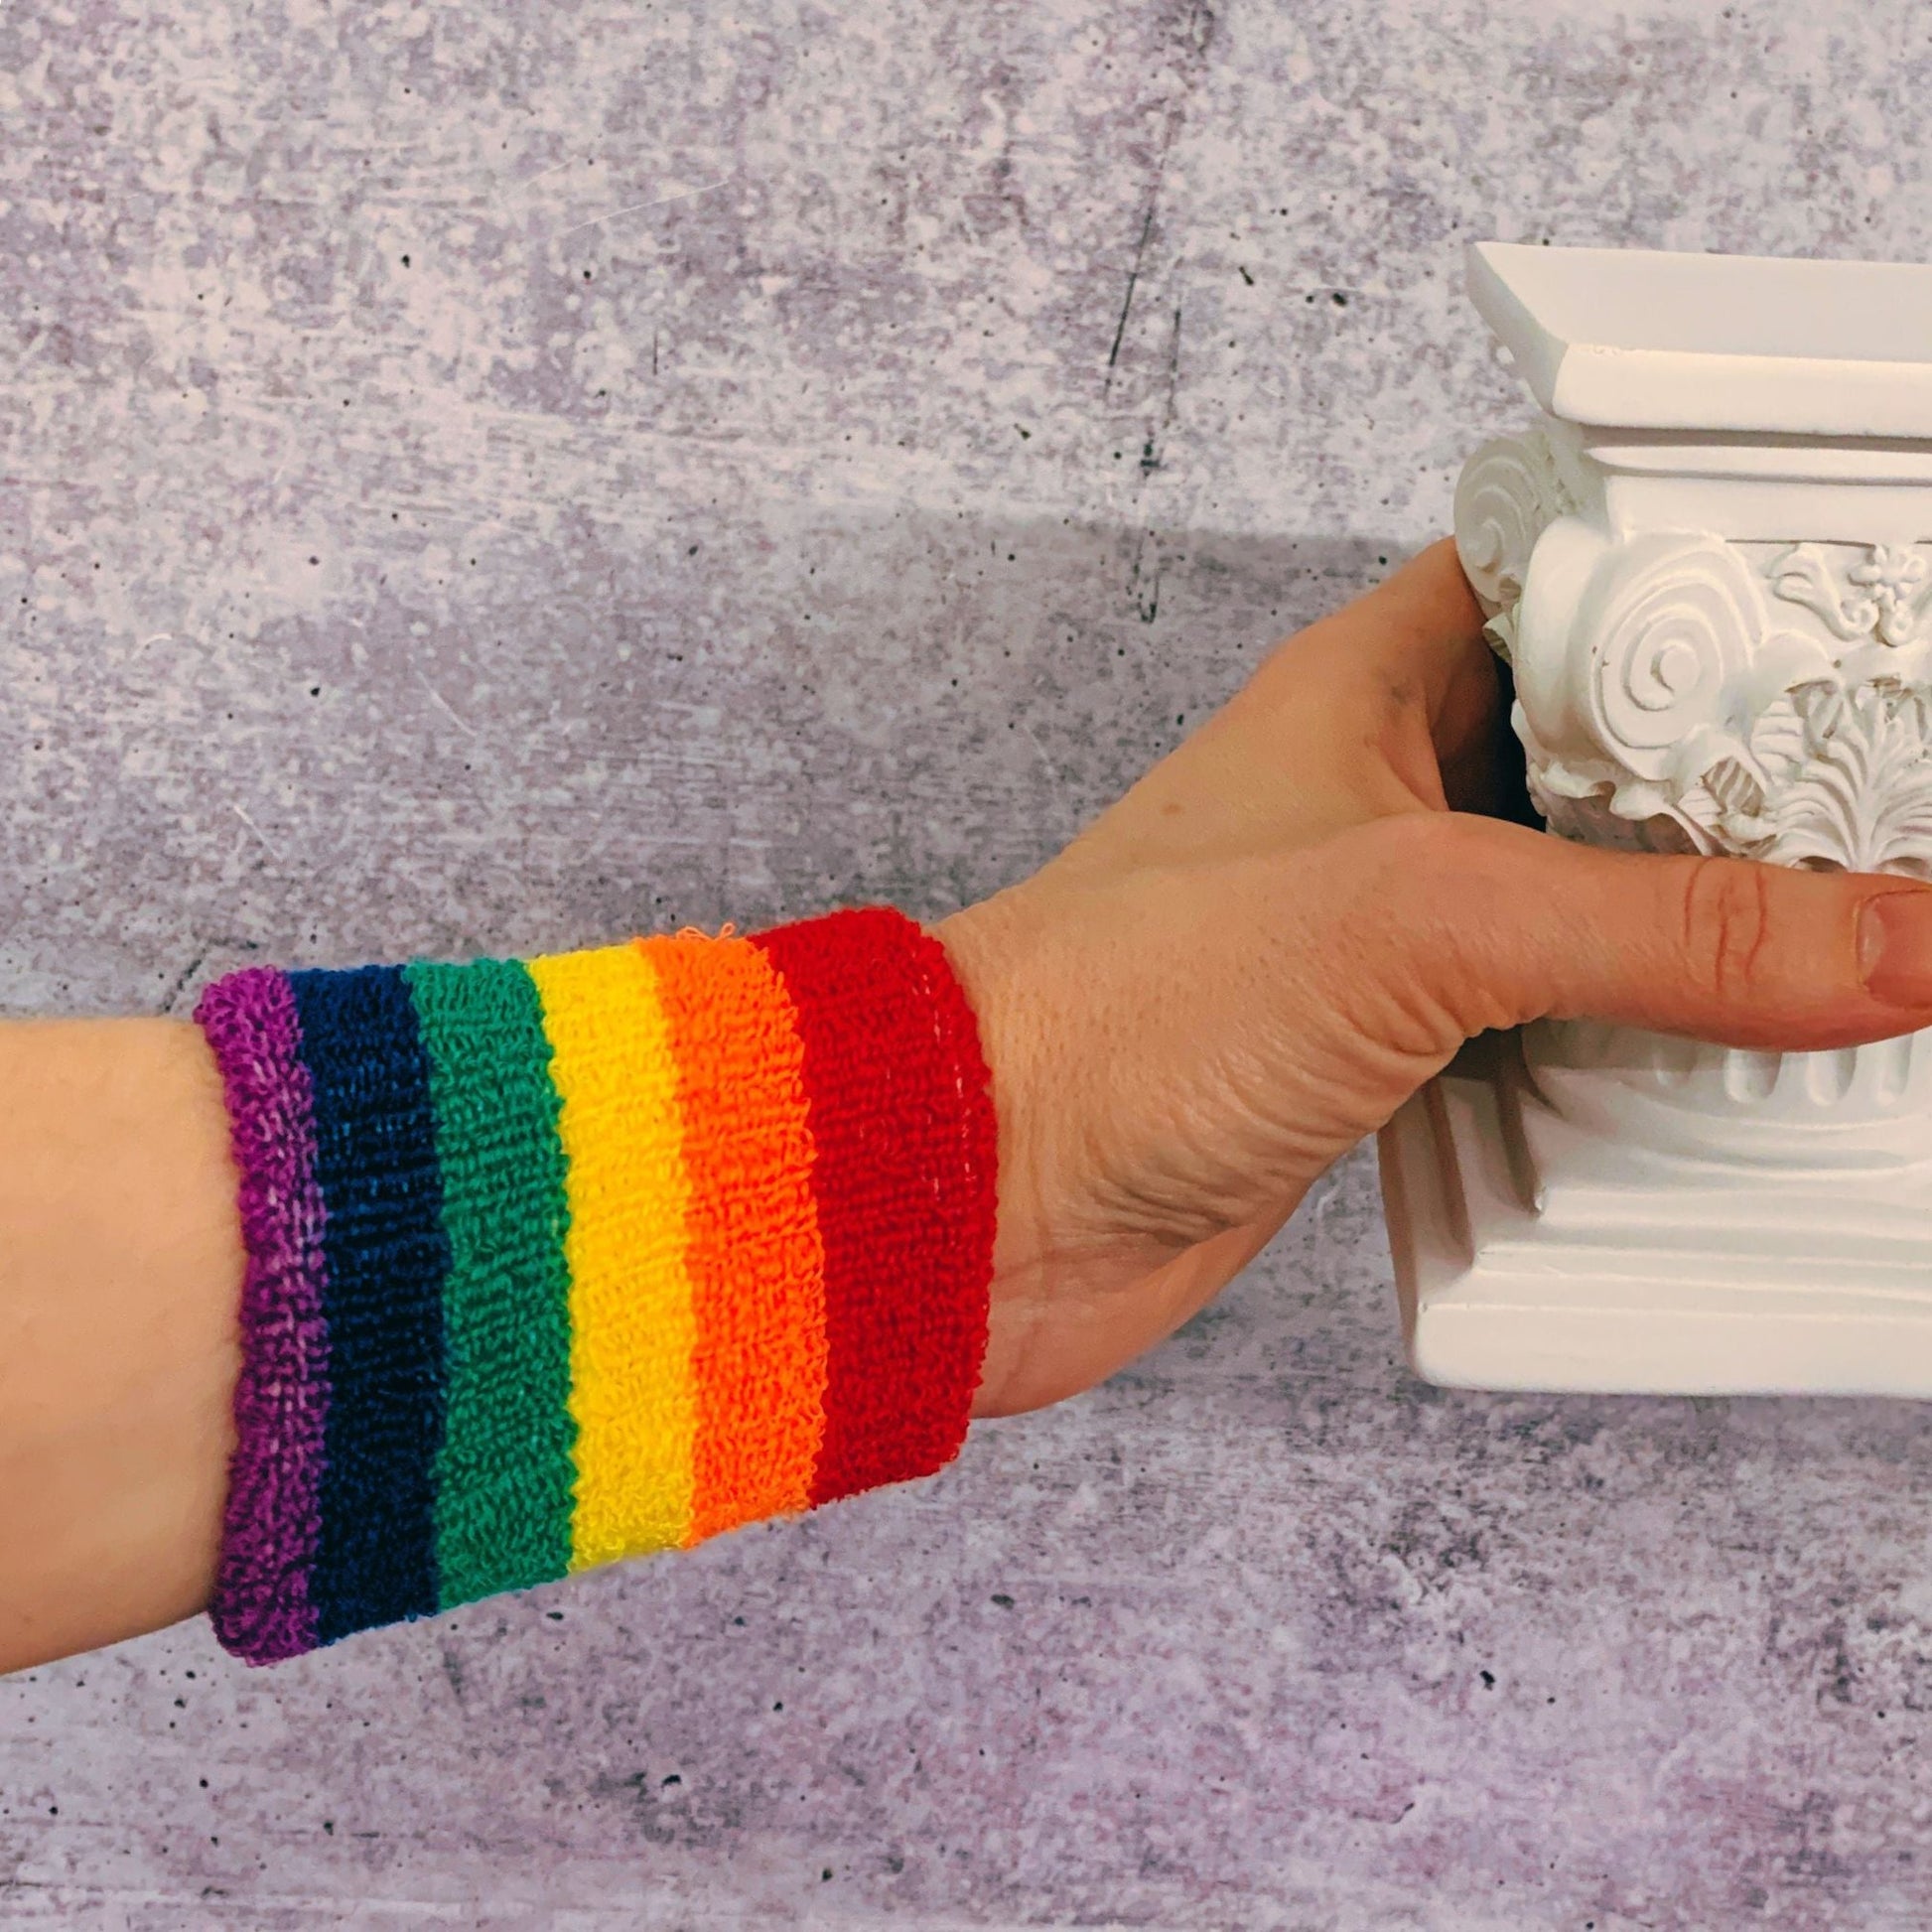 '80s Style Rainbow Wristbands | Absorbent Stretch Exercise Cuffs